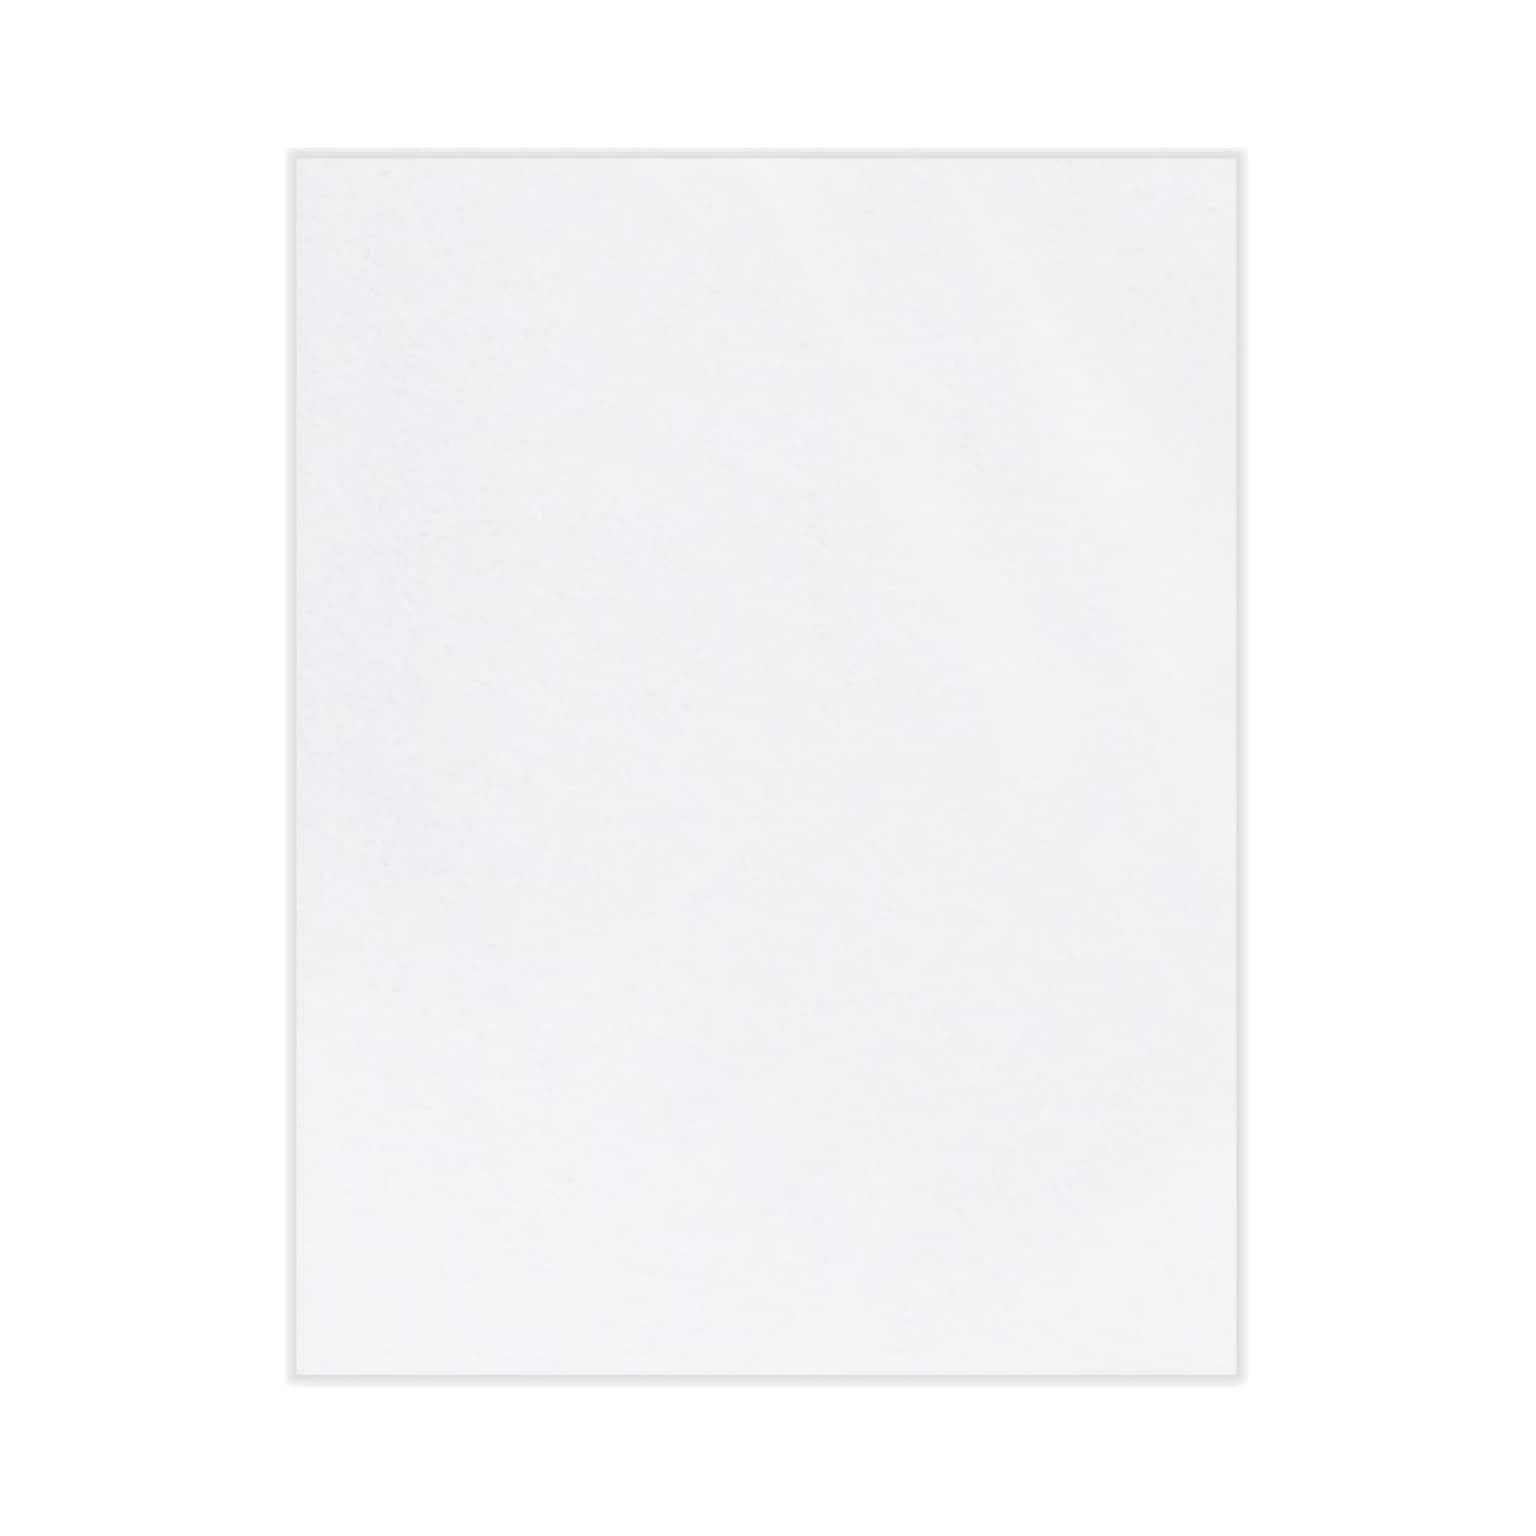 Lux Cardstock 8.5 x 11 inch Bright White 1000/Pack